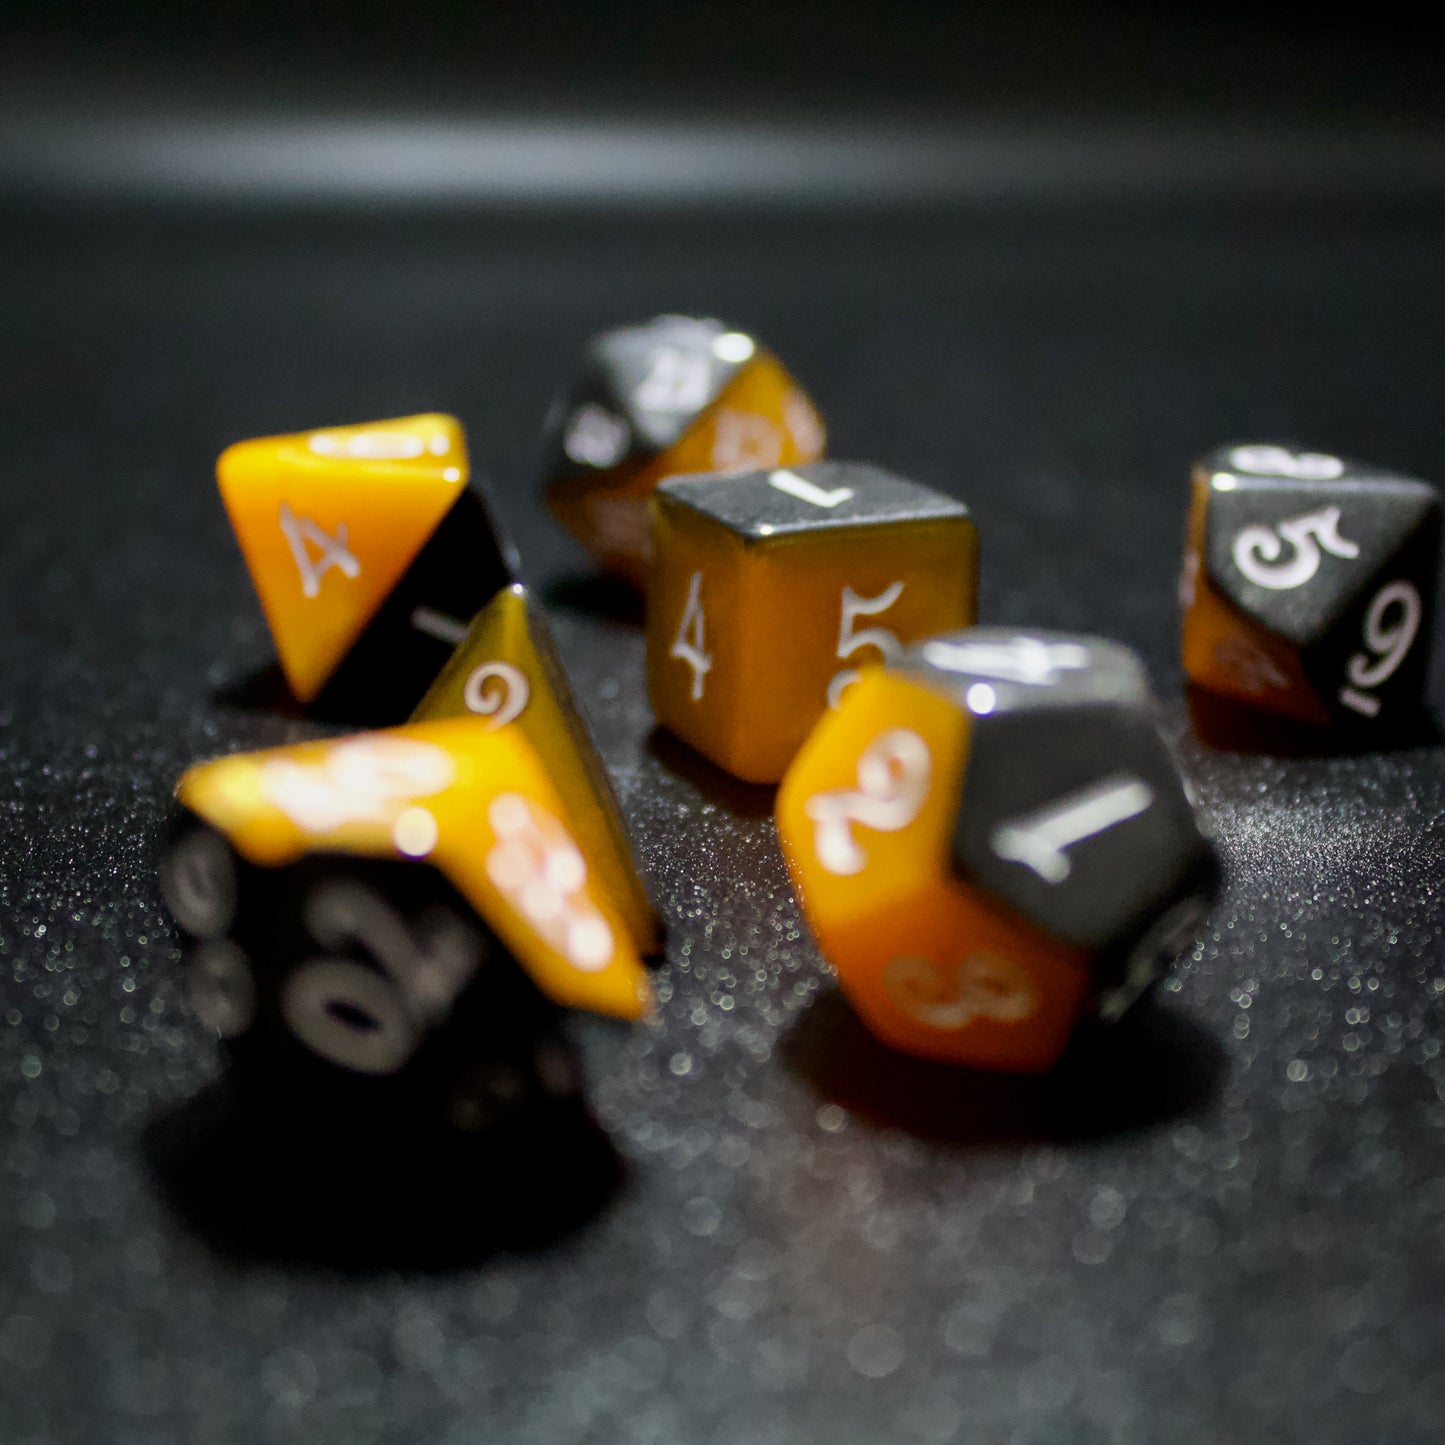 resin dnd dice sets for dungeons and dragons, role playing games and TTRPGs and dice goblin critter collectors